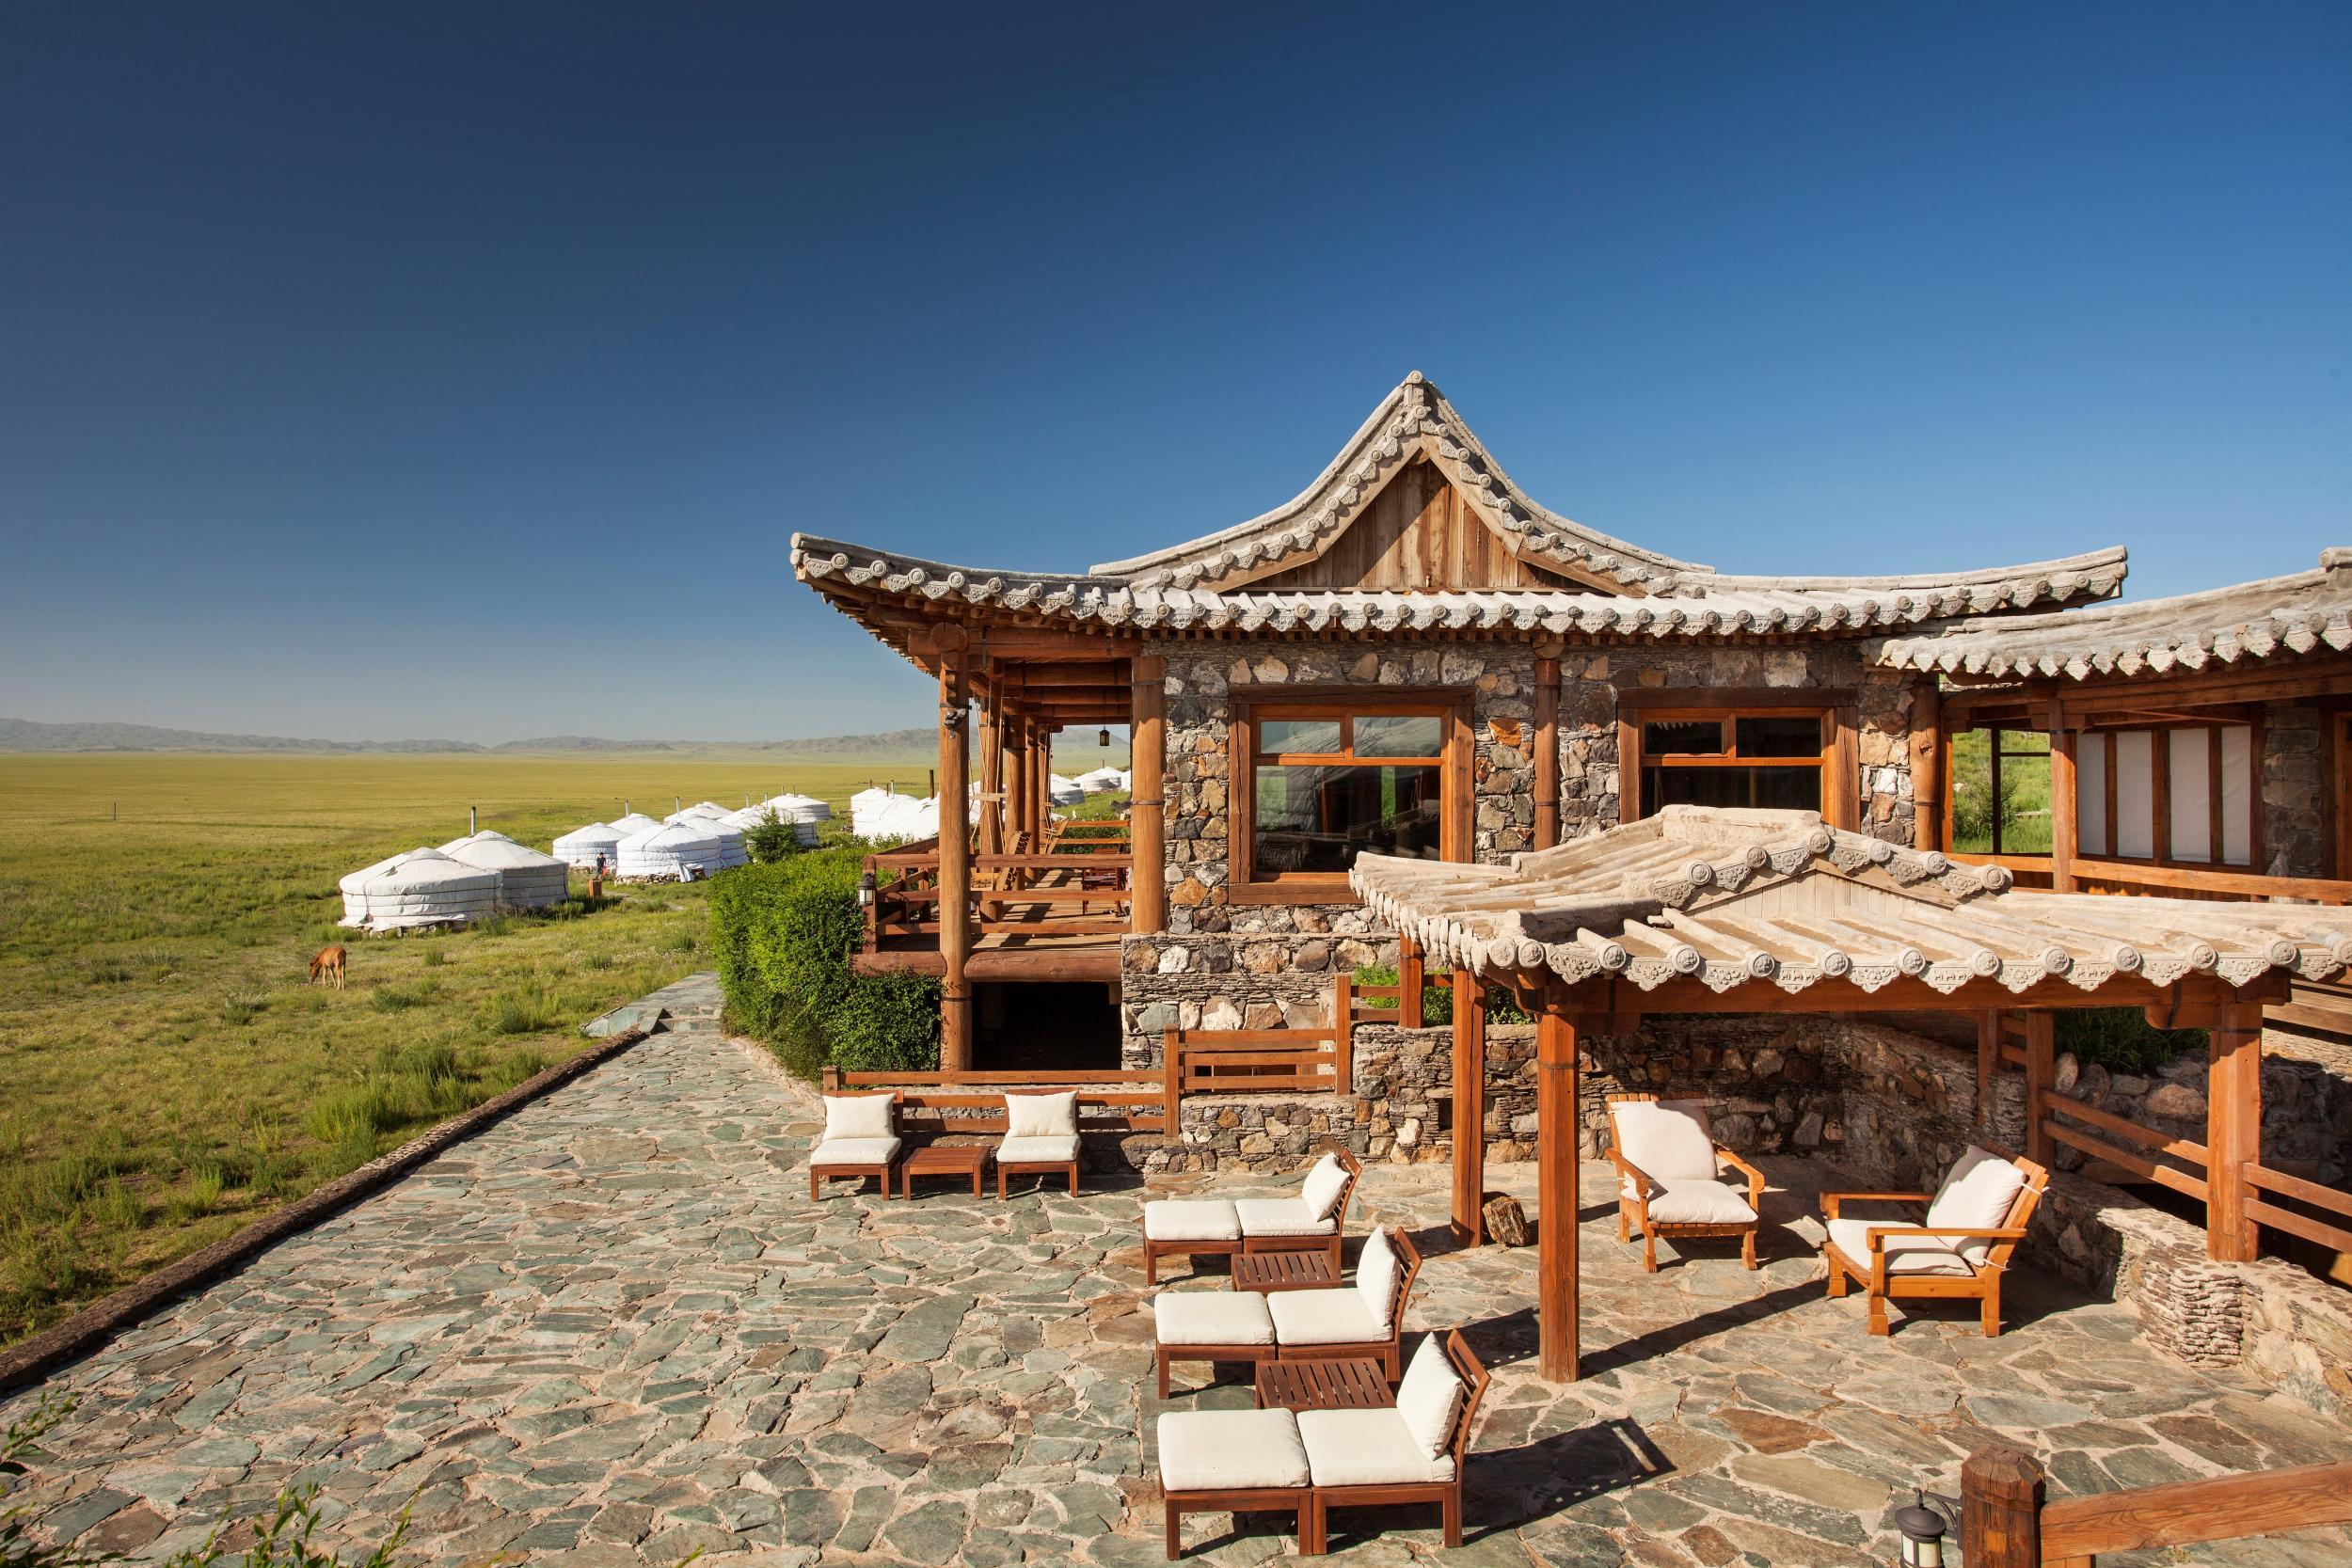 Get away from it all at the Three Camel Lodge in the Gobi Desert